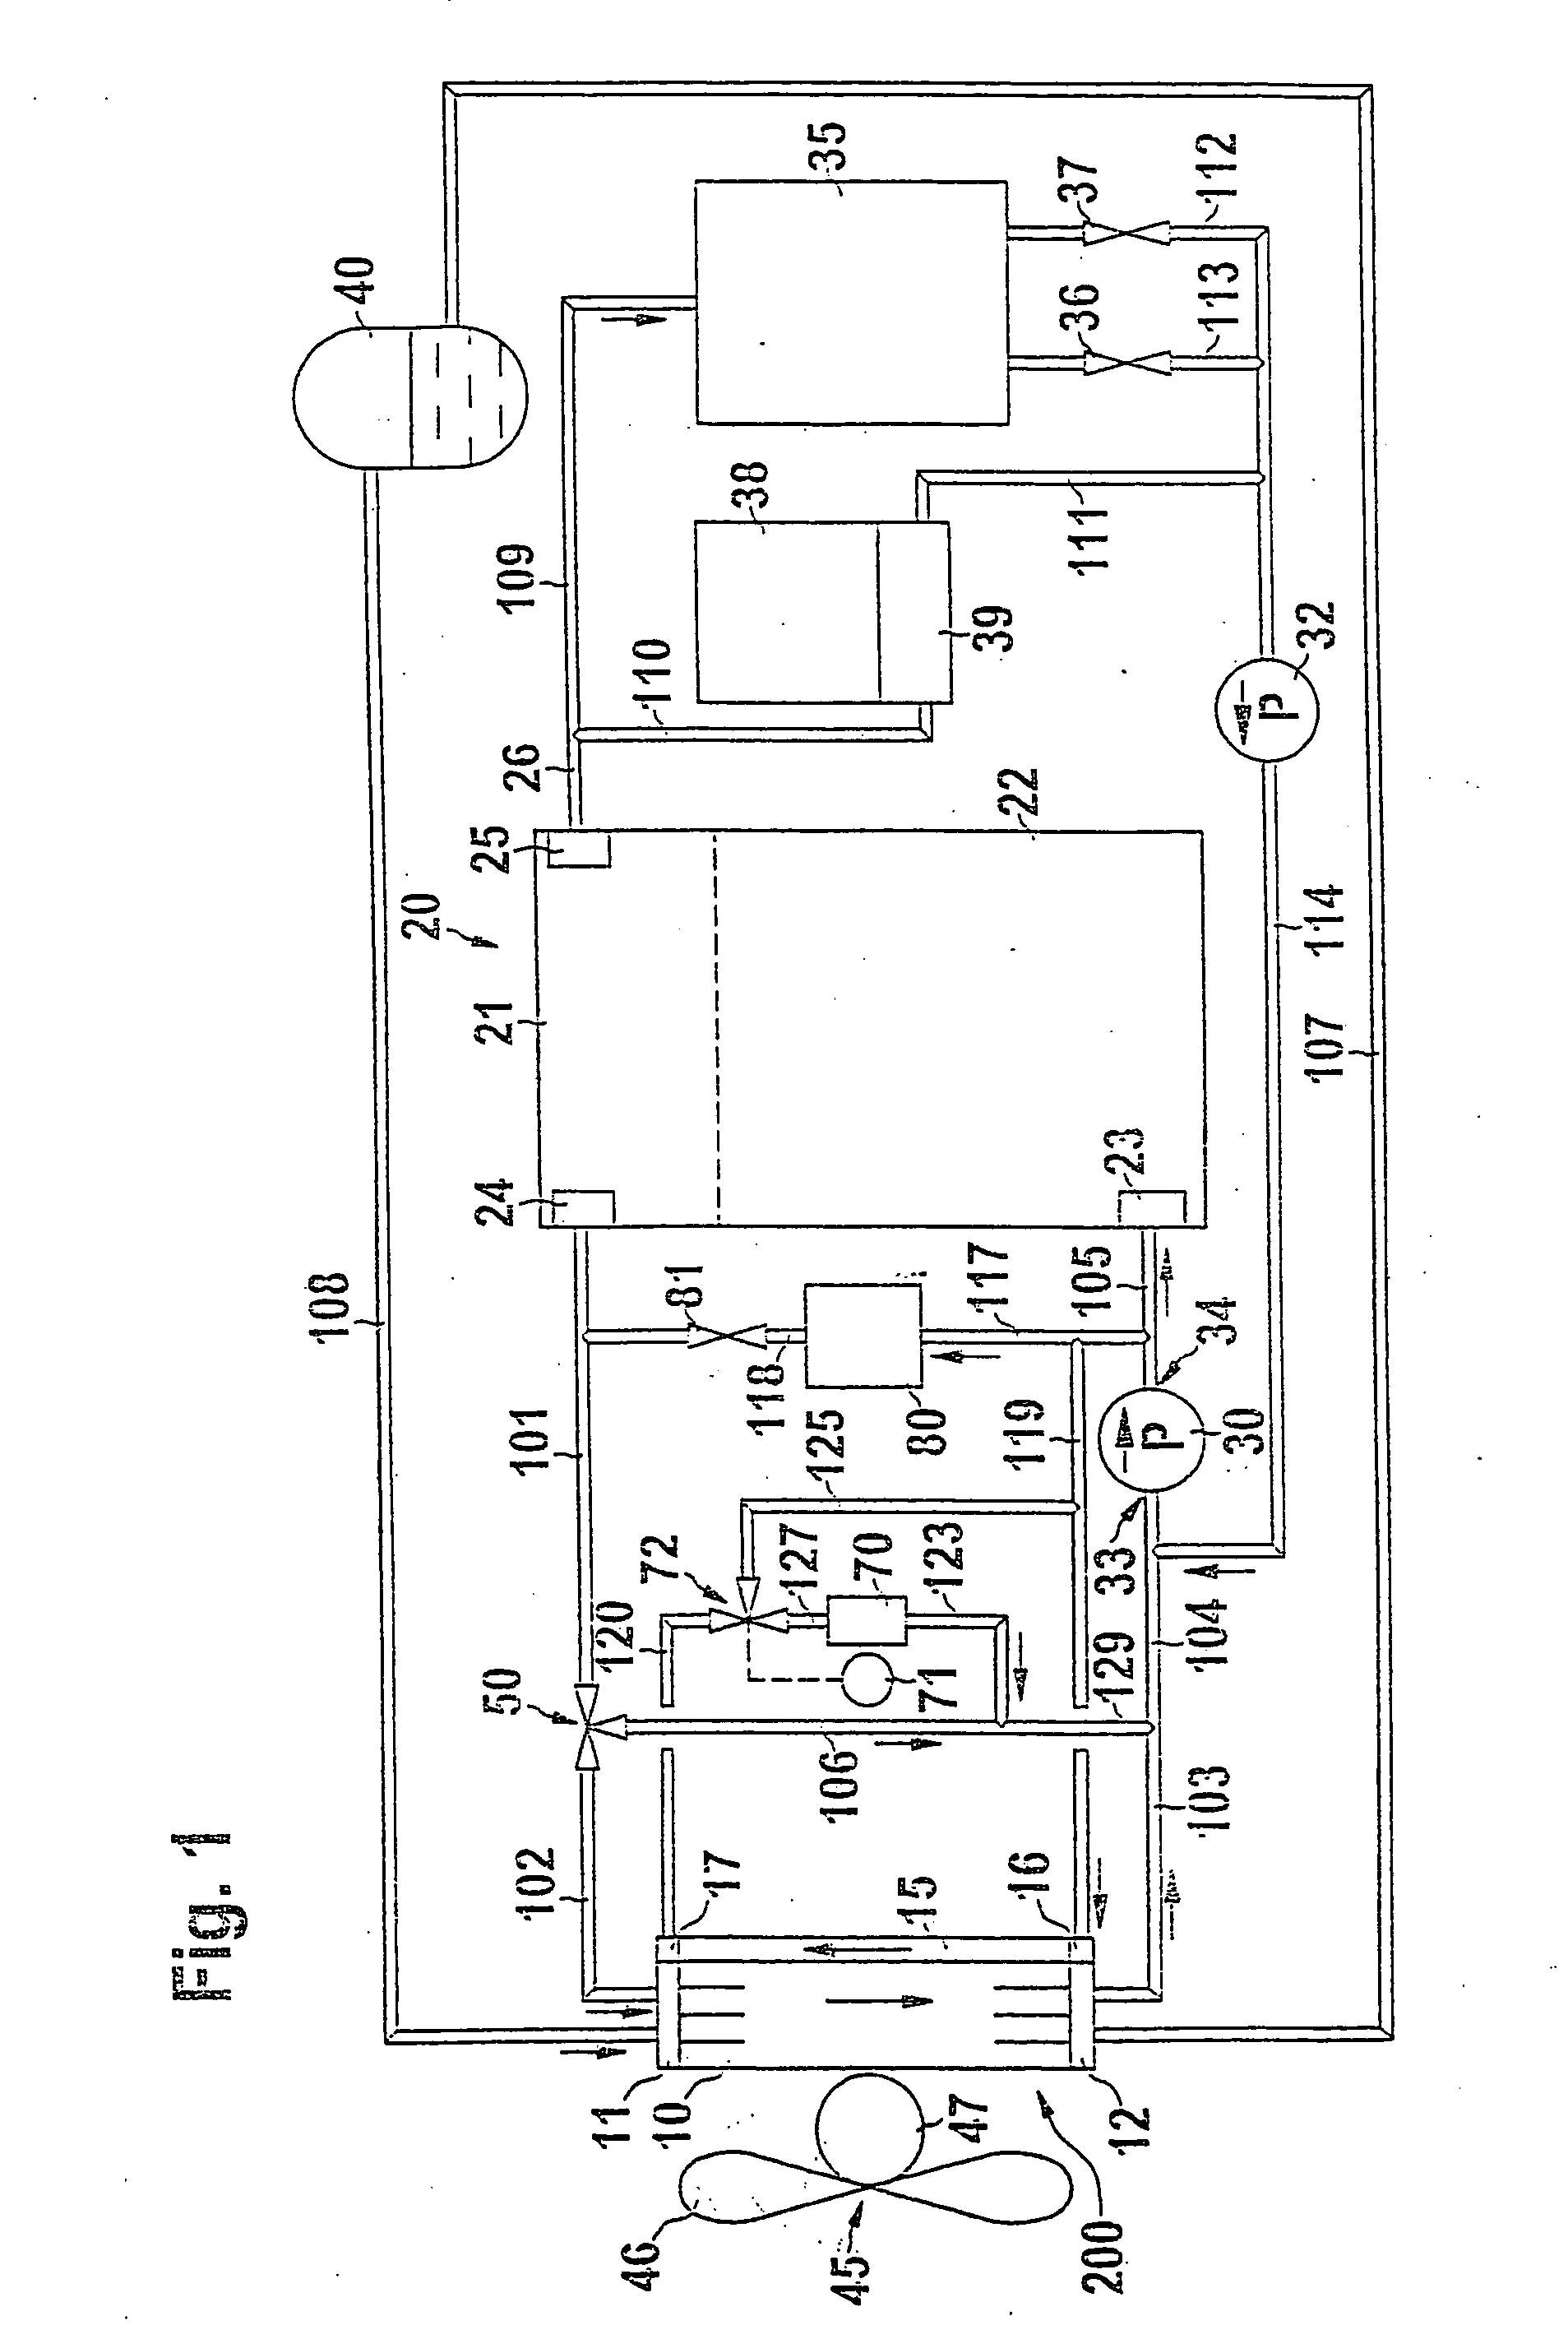 Device for cooling and heating a motor vehicle